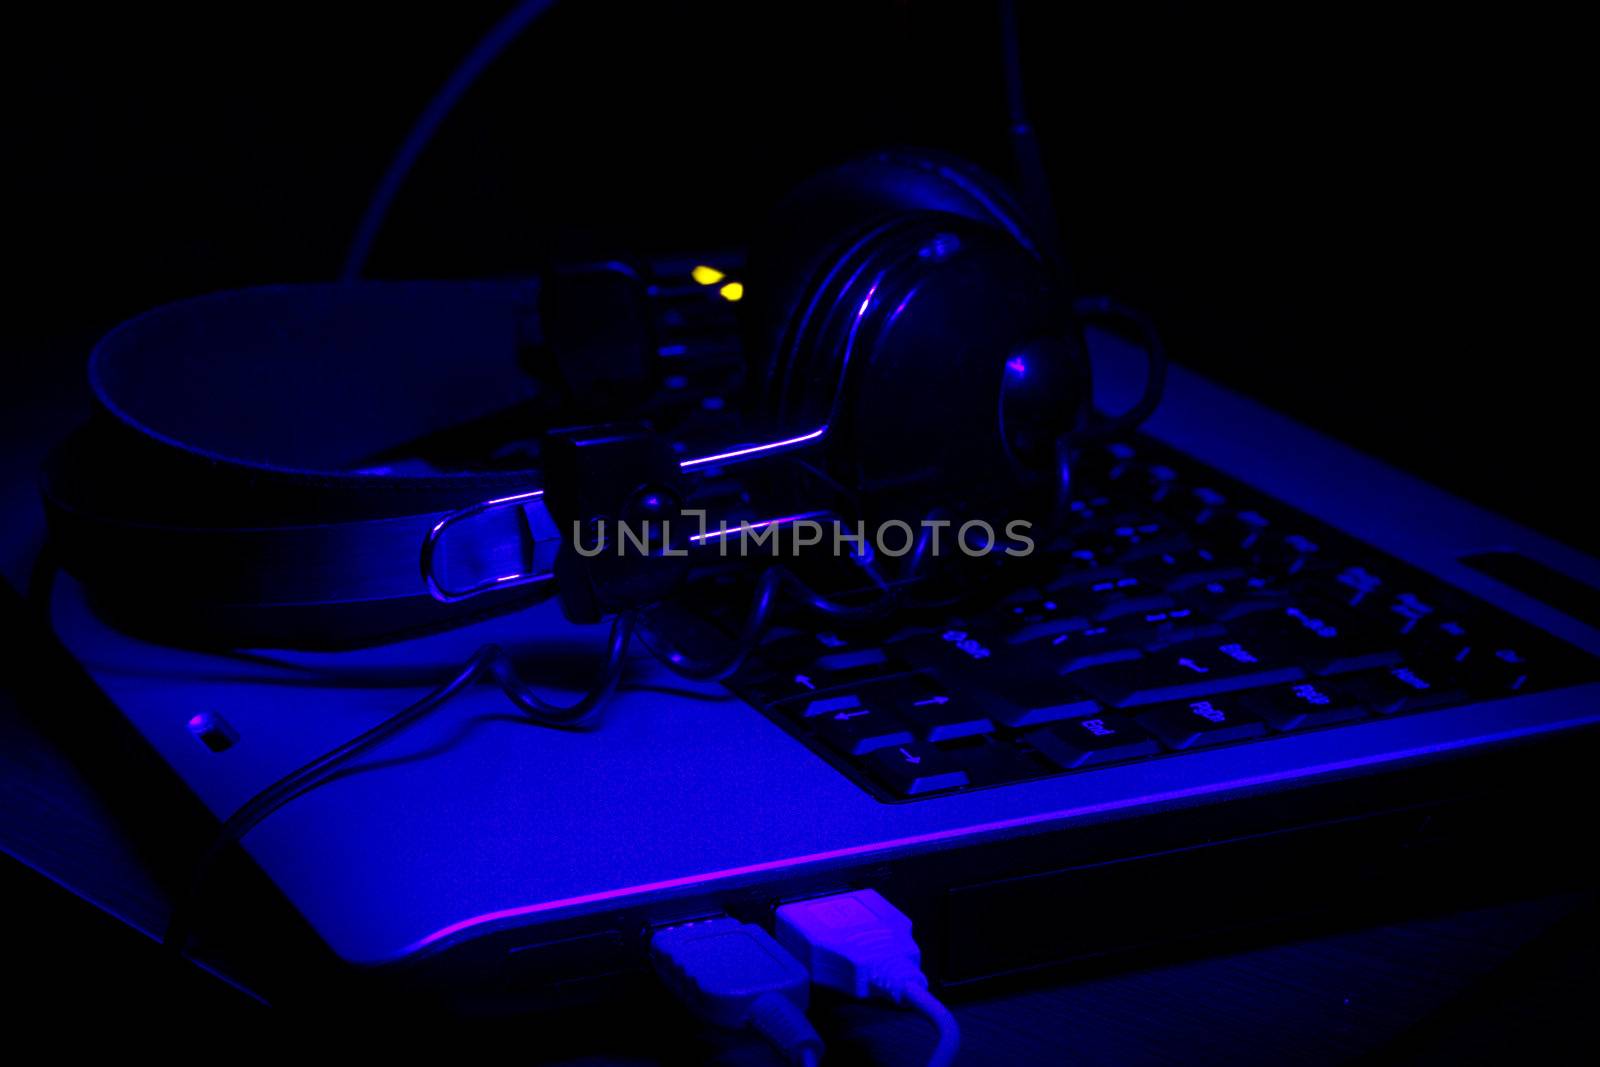 keyboard and headphones in ultra-violet rays by Alekcey